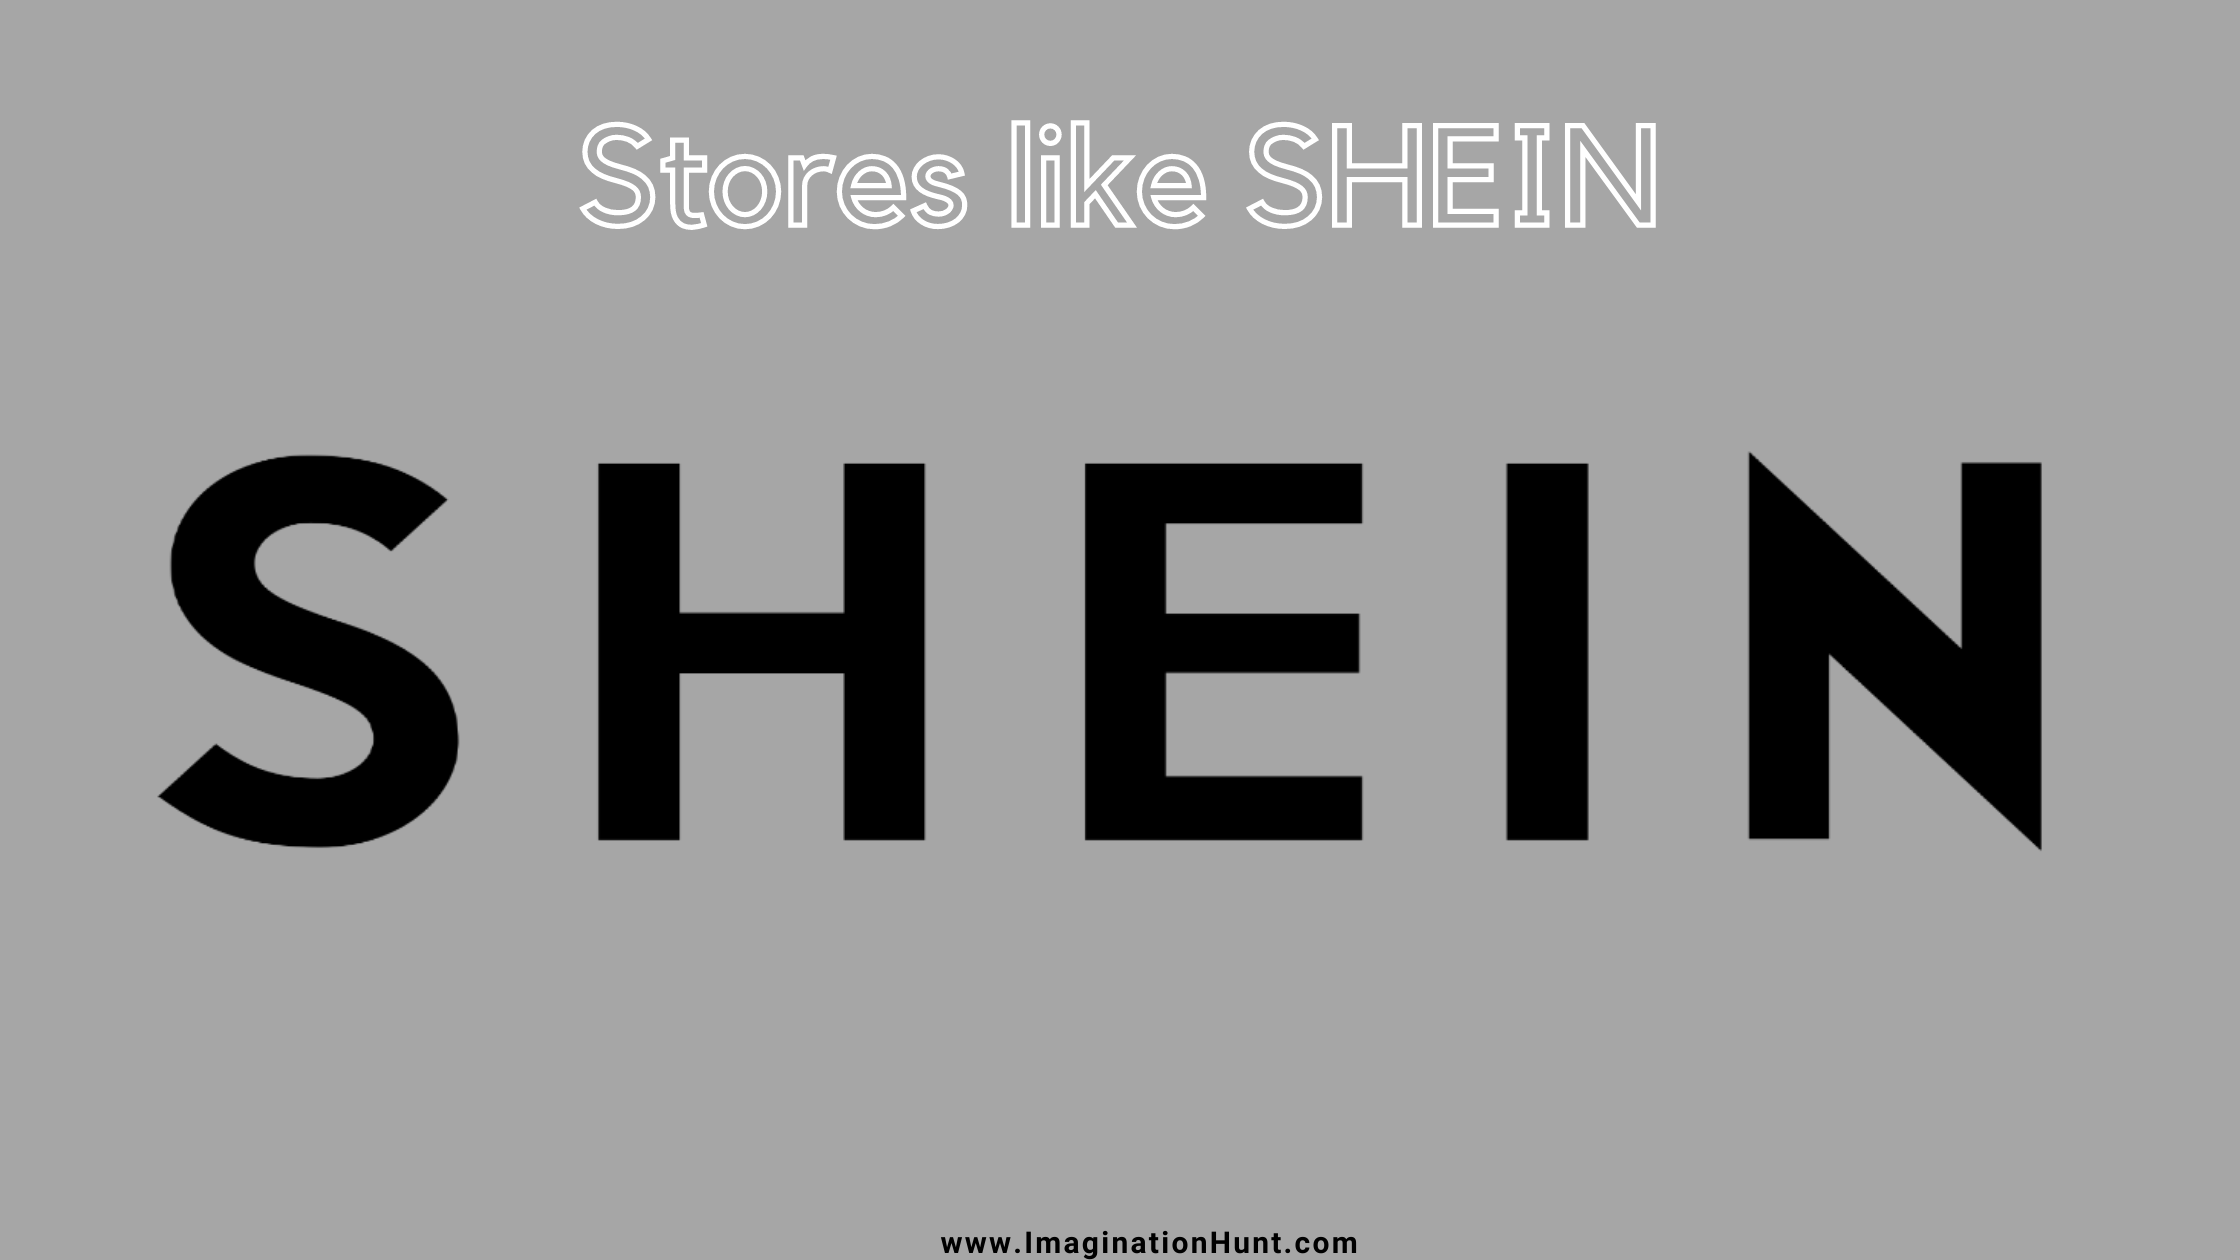 Stores like SHEIN